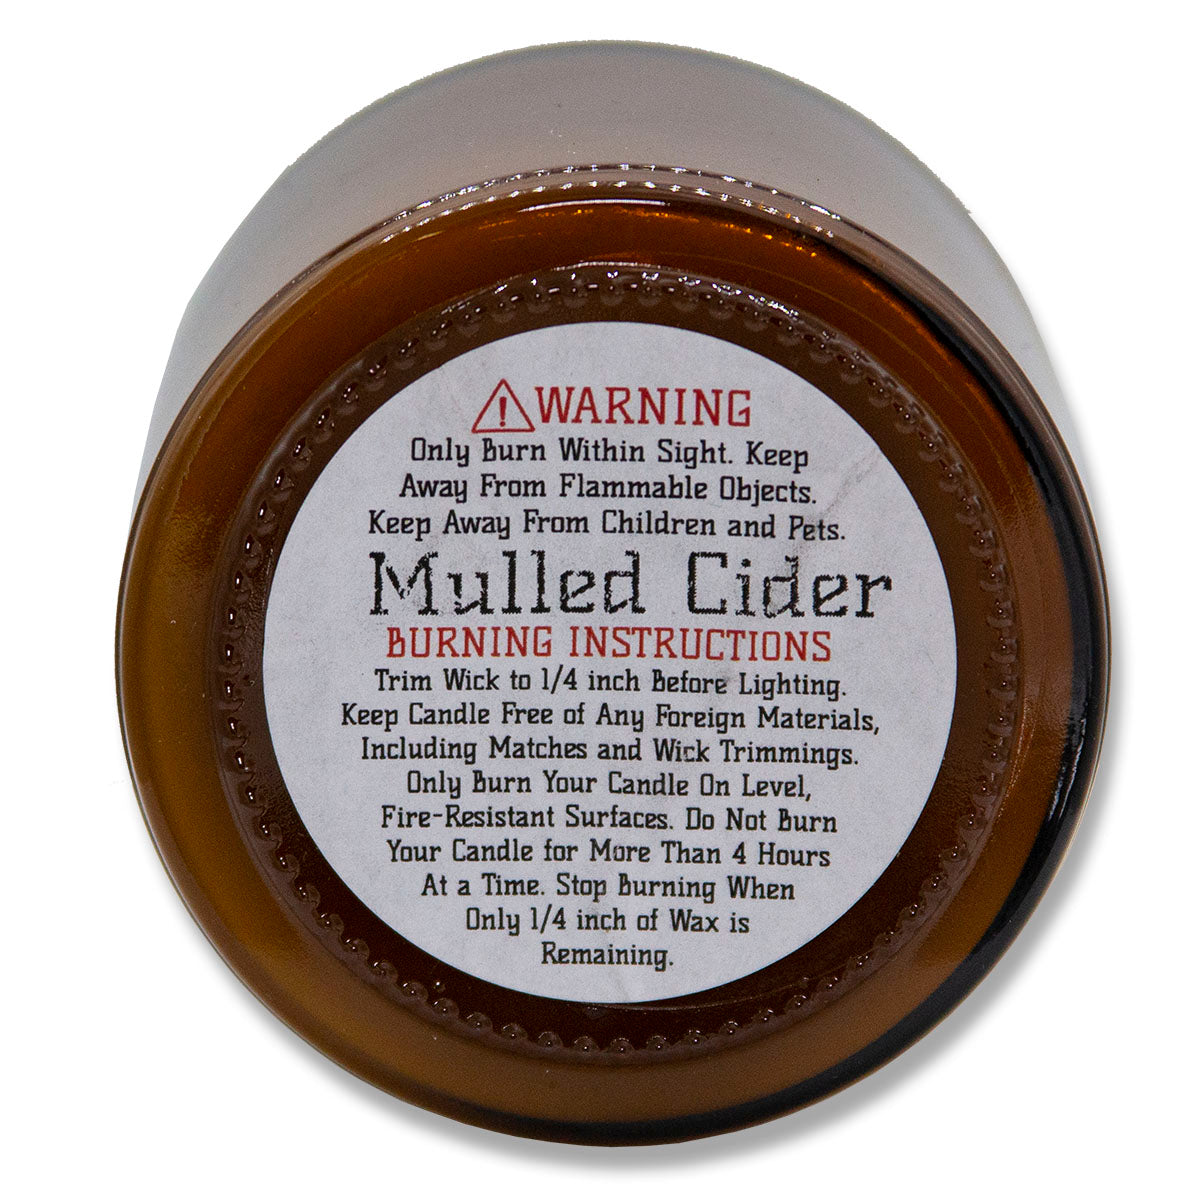 Mulled Cider, Lone Star Candles & More's Premium Hand Poured Strongly Scented Soy Wax Gift Candle, The scent of Sweet N Spicy Cider, USA Made in Texas, Round Amber Glass Jar 9oz Best Mom